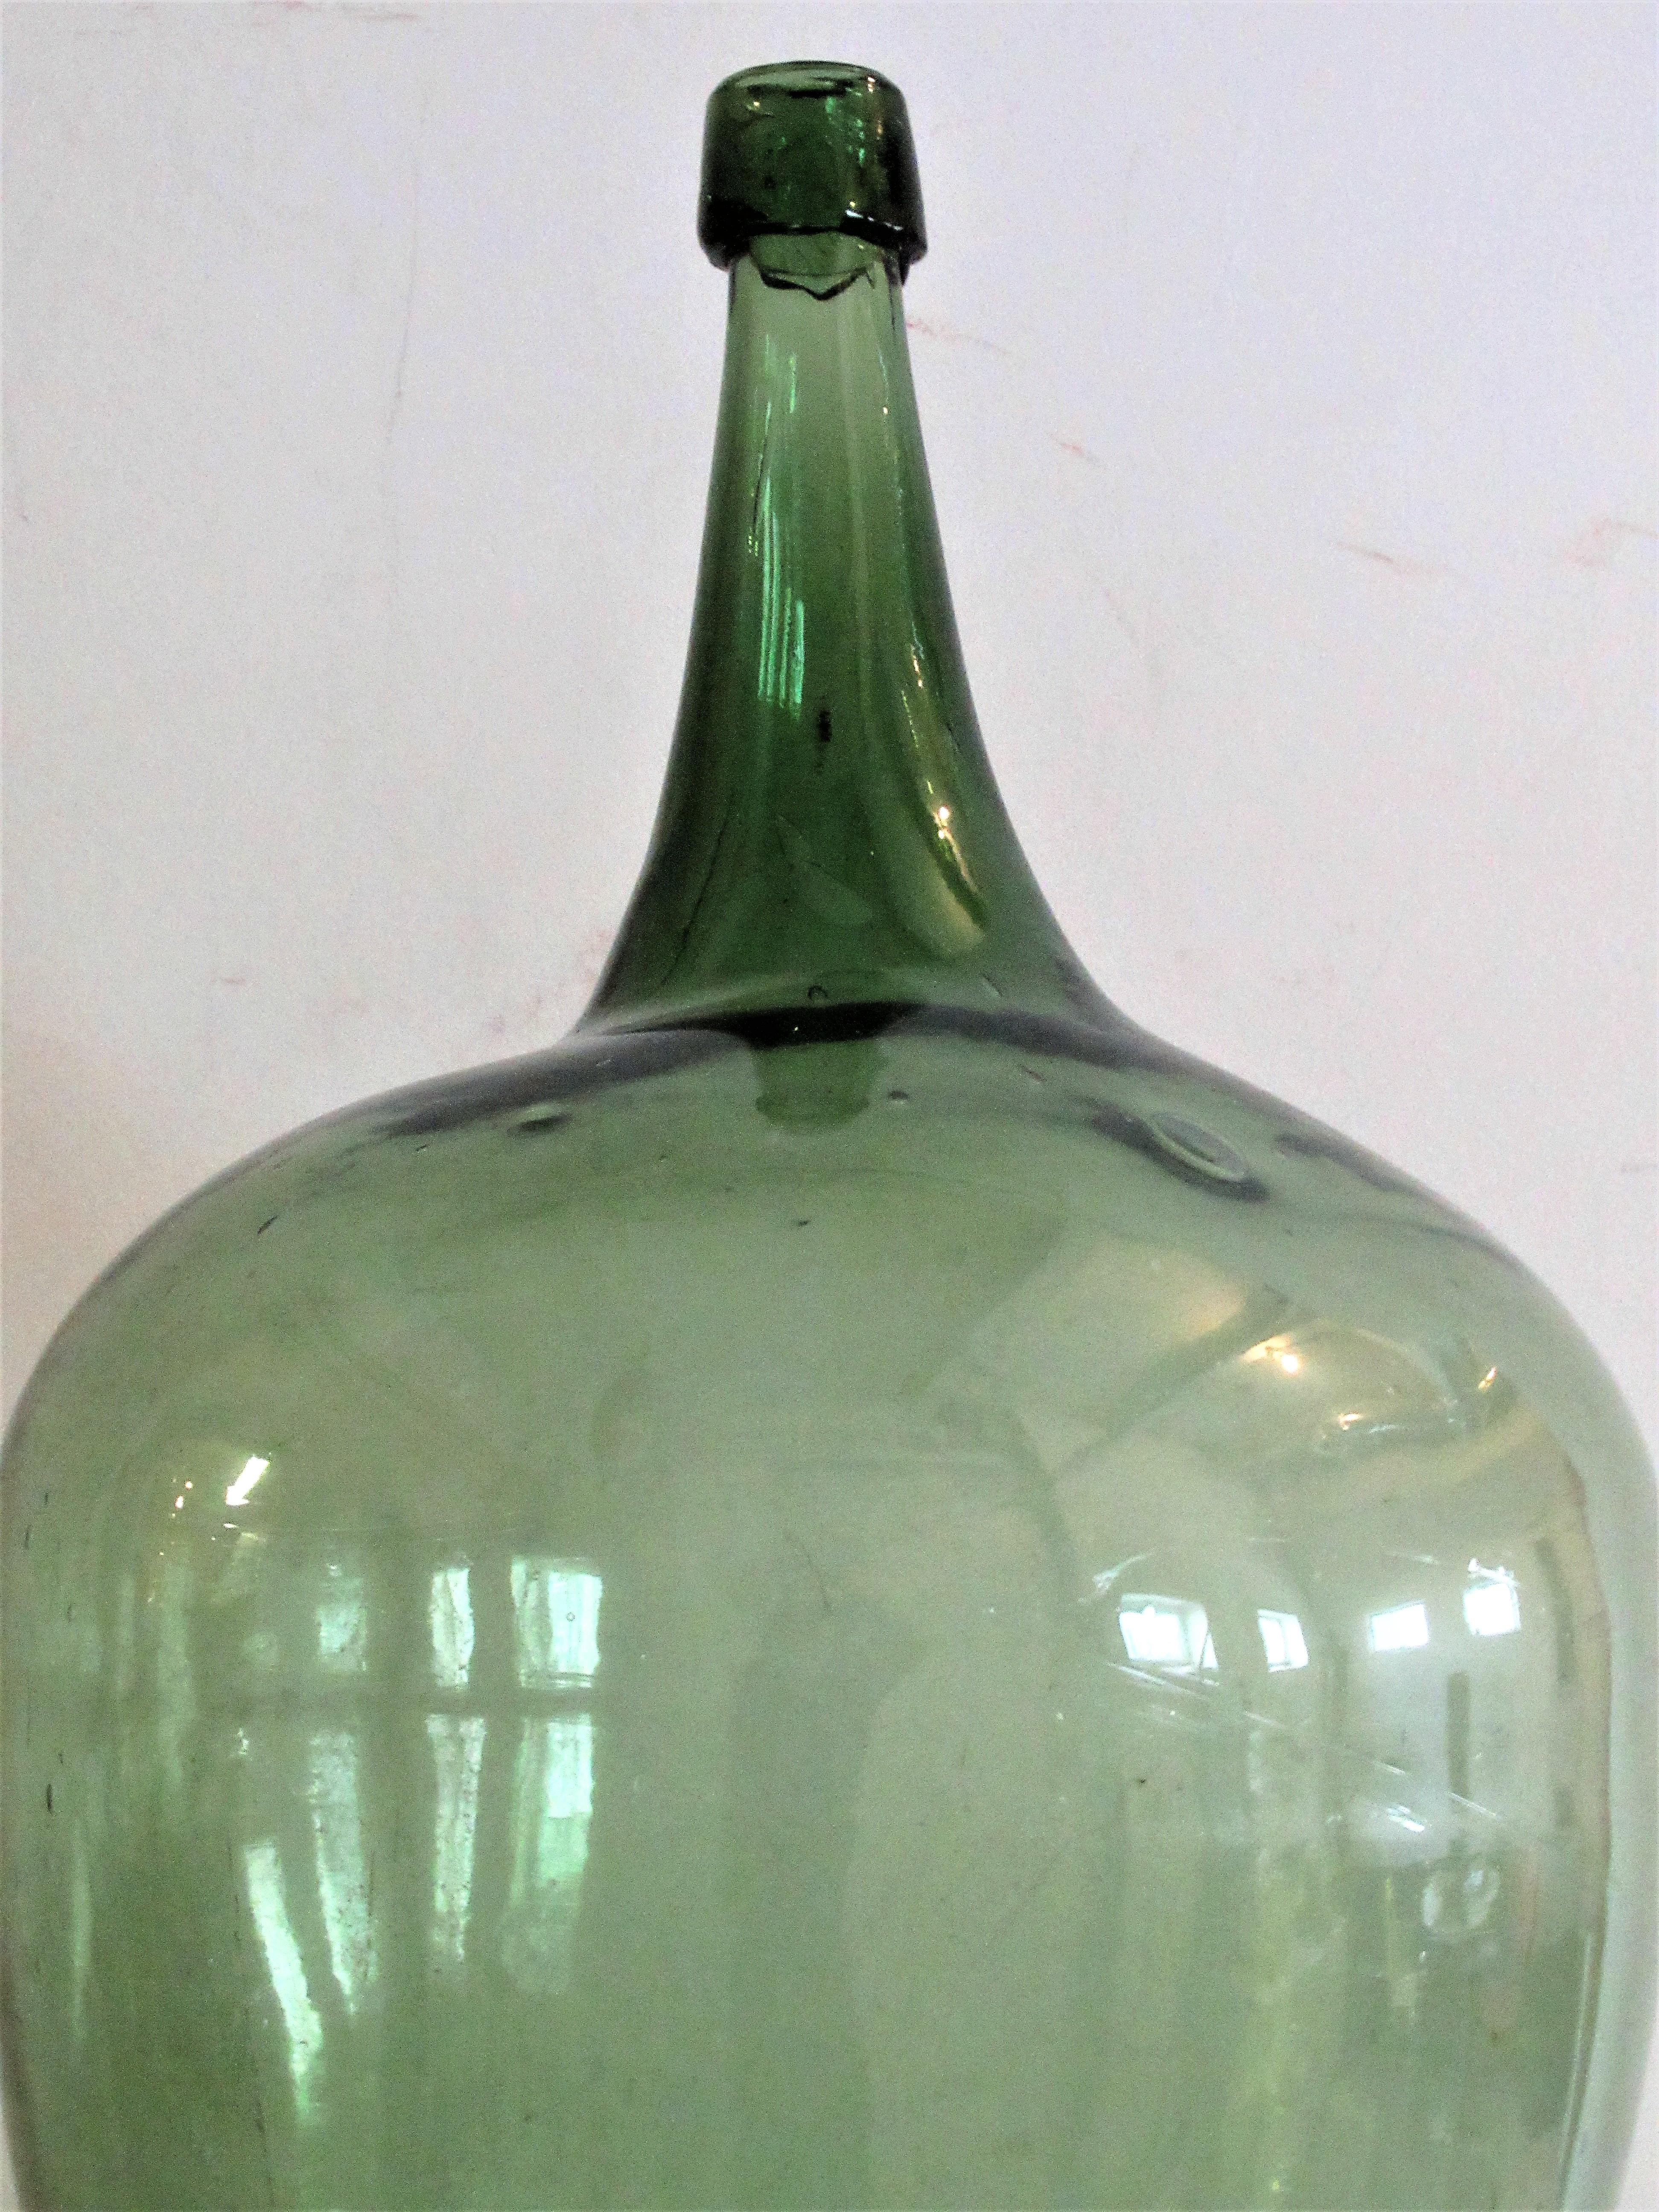 Early antique American blown green glass demijohn with a beautiful bold irregular sculptural form and a very deep dished pontil. From an old private collection - most likely Western New York State in origin dating anywhere from the late 18th-early